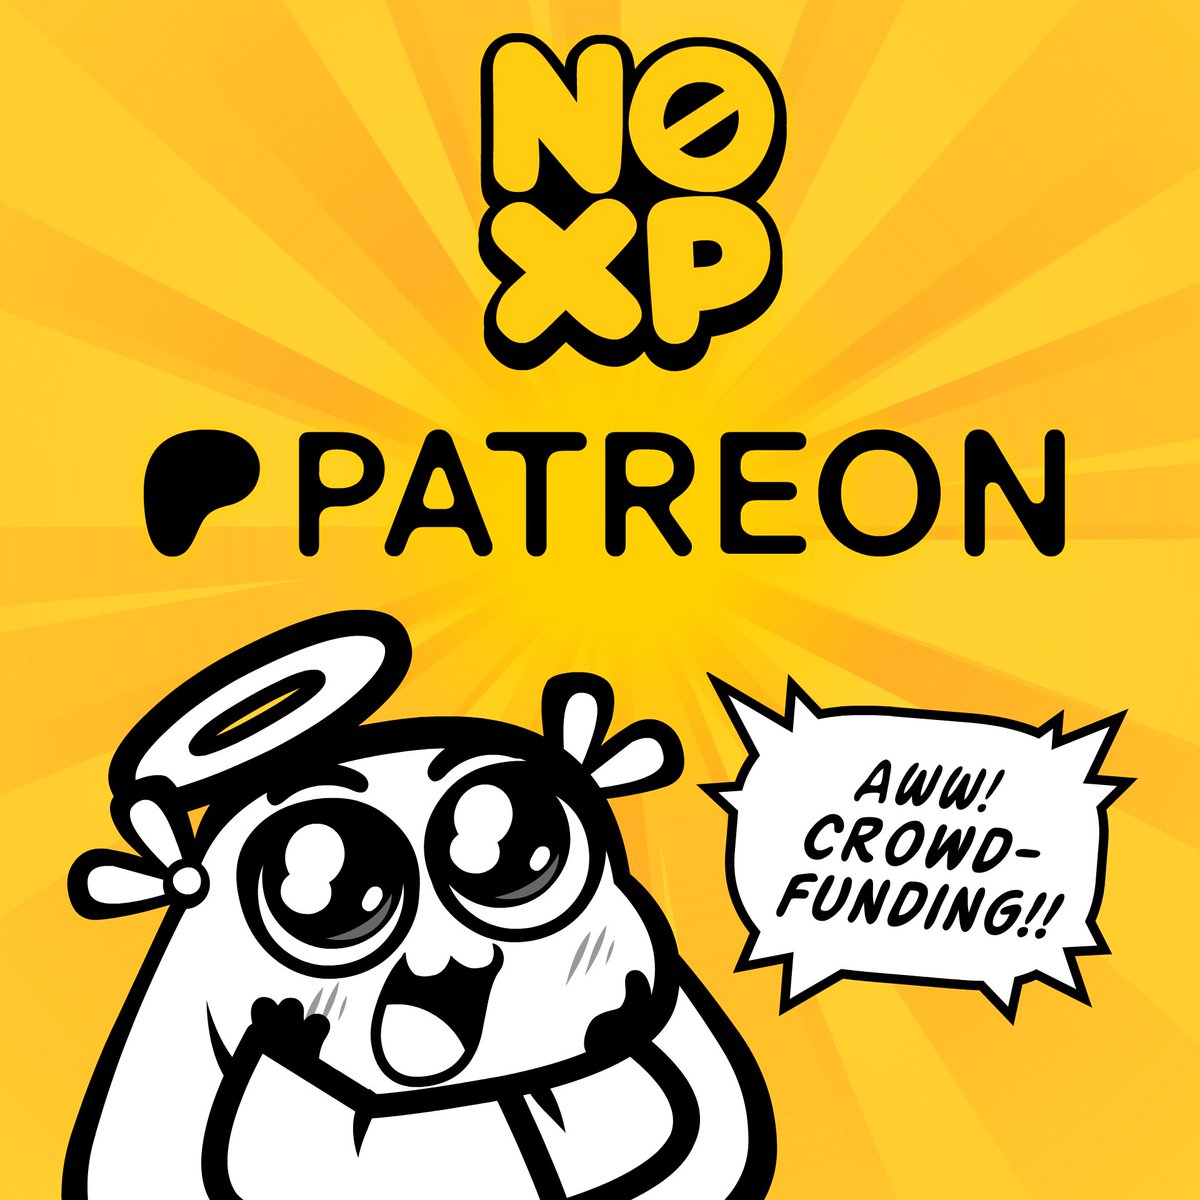 BIG NEWS! NOXP has a PATREON now!! Become a ⚔️LEGEND⚔️ by supporting the show and the people who make it! LINK BELOW ⬇️⬇️⬇️